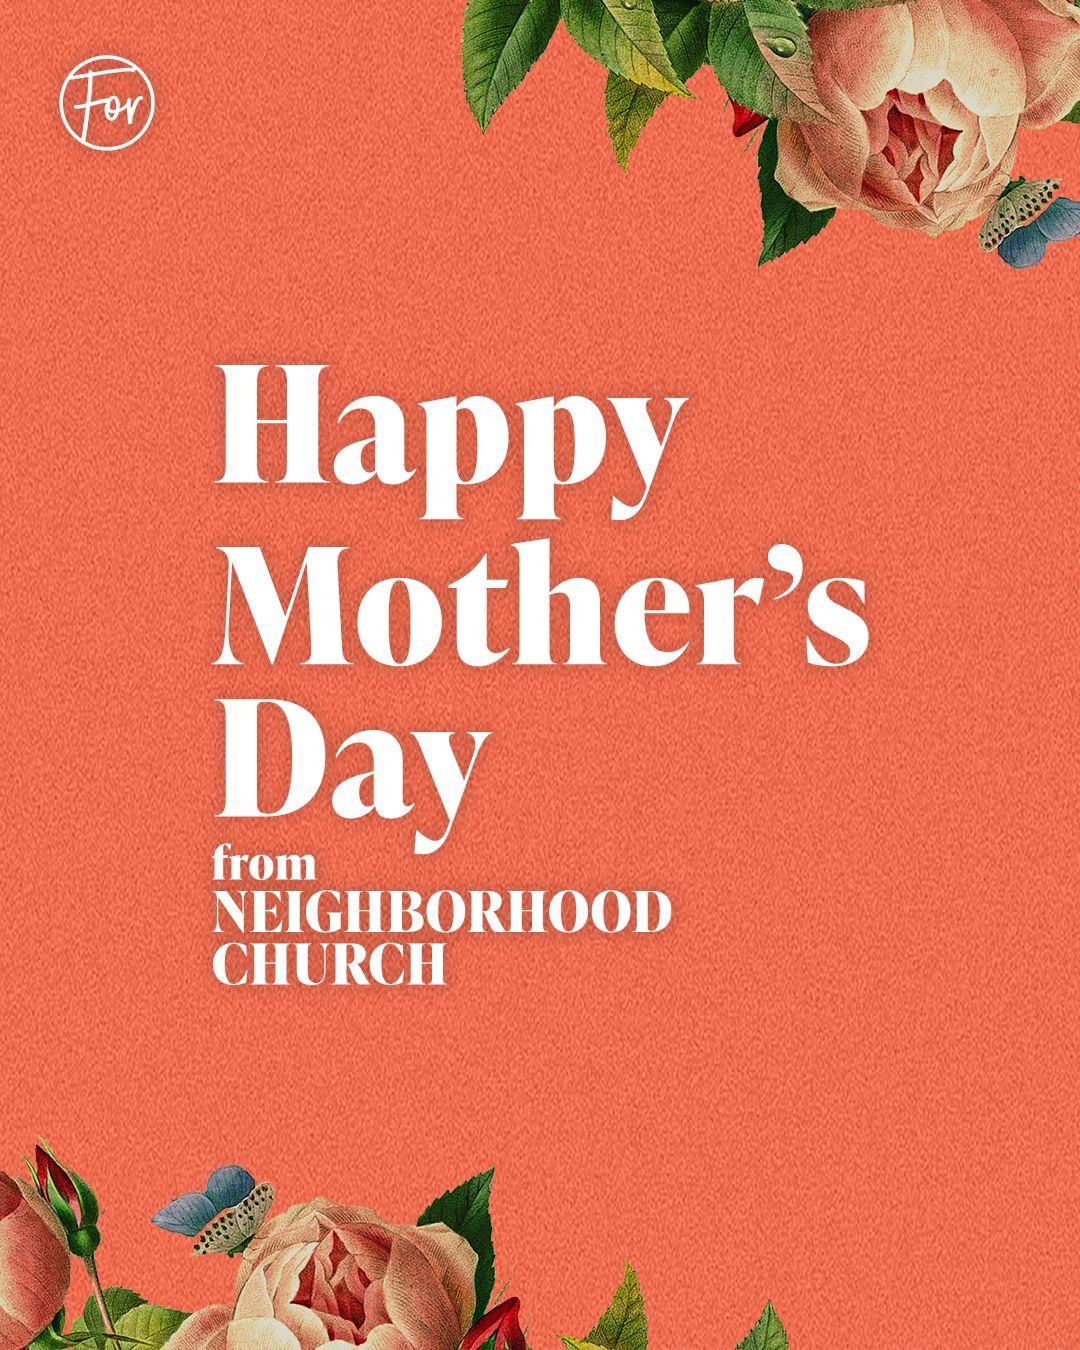 For mothers.
For those longing to be mothers.
For foster mothers.
For the stand-in mothers.
For the mothers who have lost a child.
For bonus and stepmothers.
For those with a strained relationship with their mother.
For those grieving the loss of the